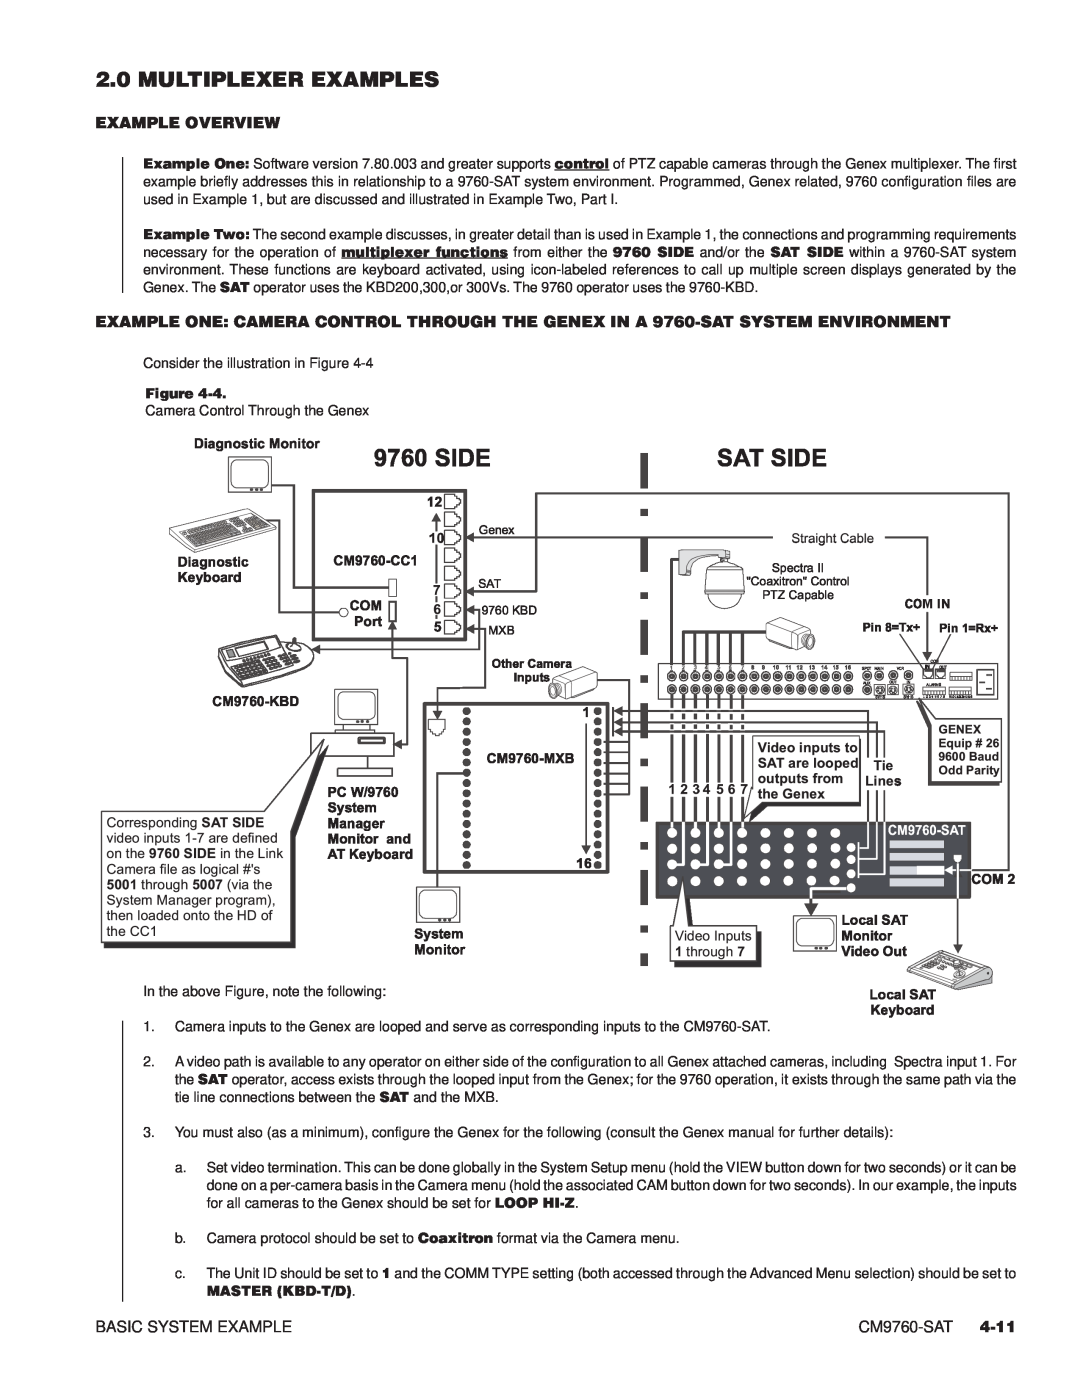 Pelco C538M, C1501M, C1503M, C549M-A, C544M Multiplexer Examples, Example Overview, Basic System Example, CM9760-SAT, Figure 